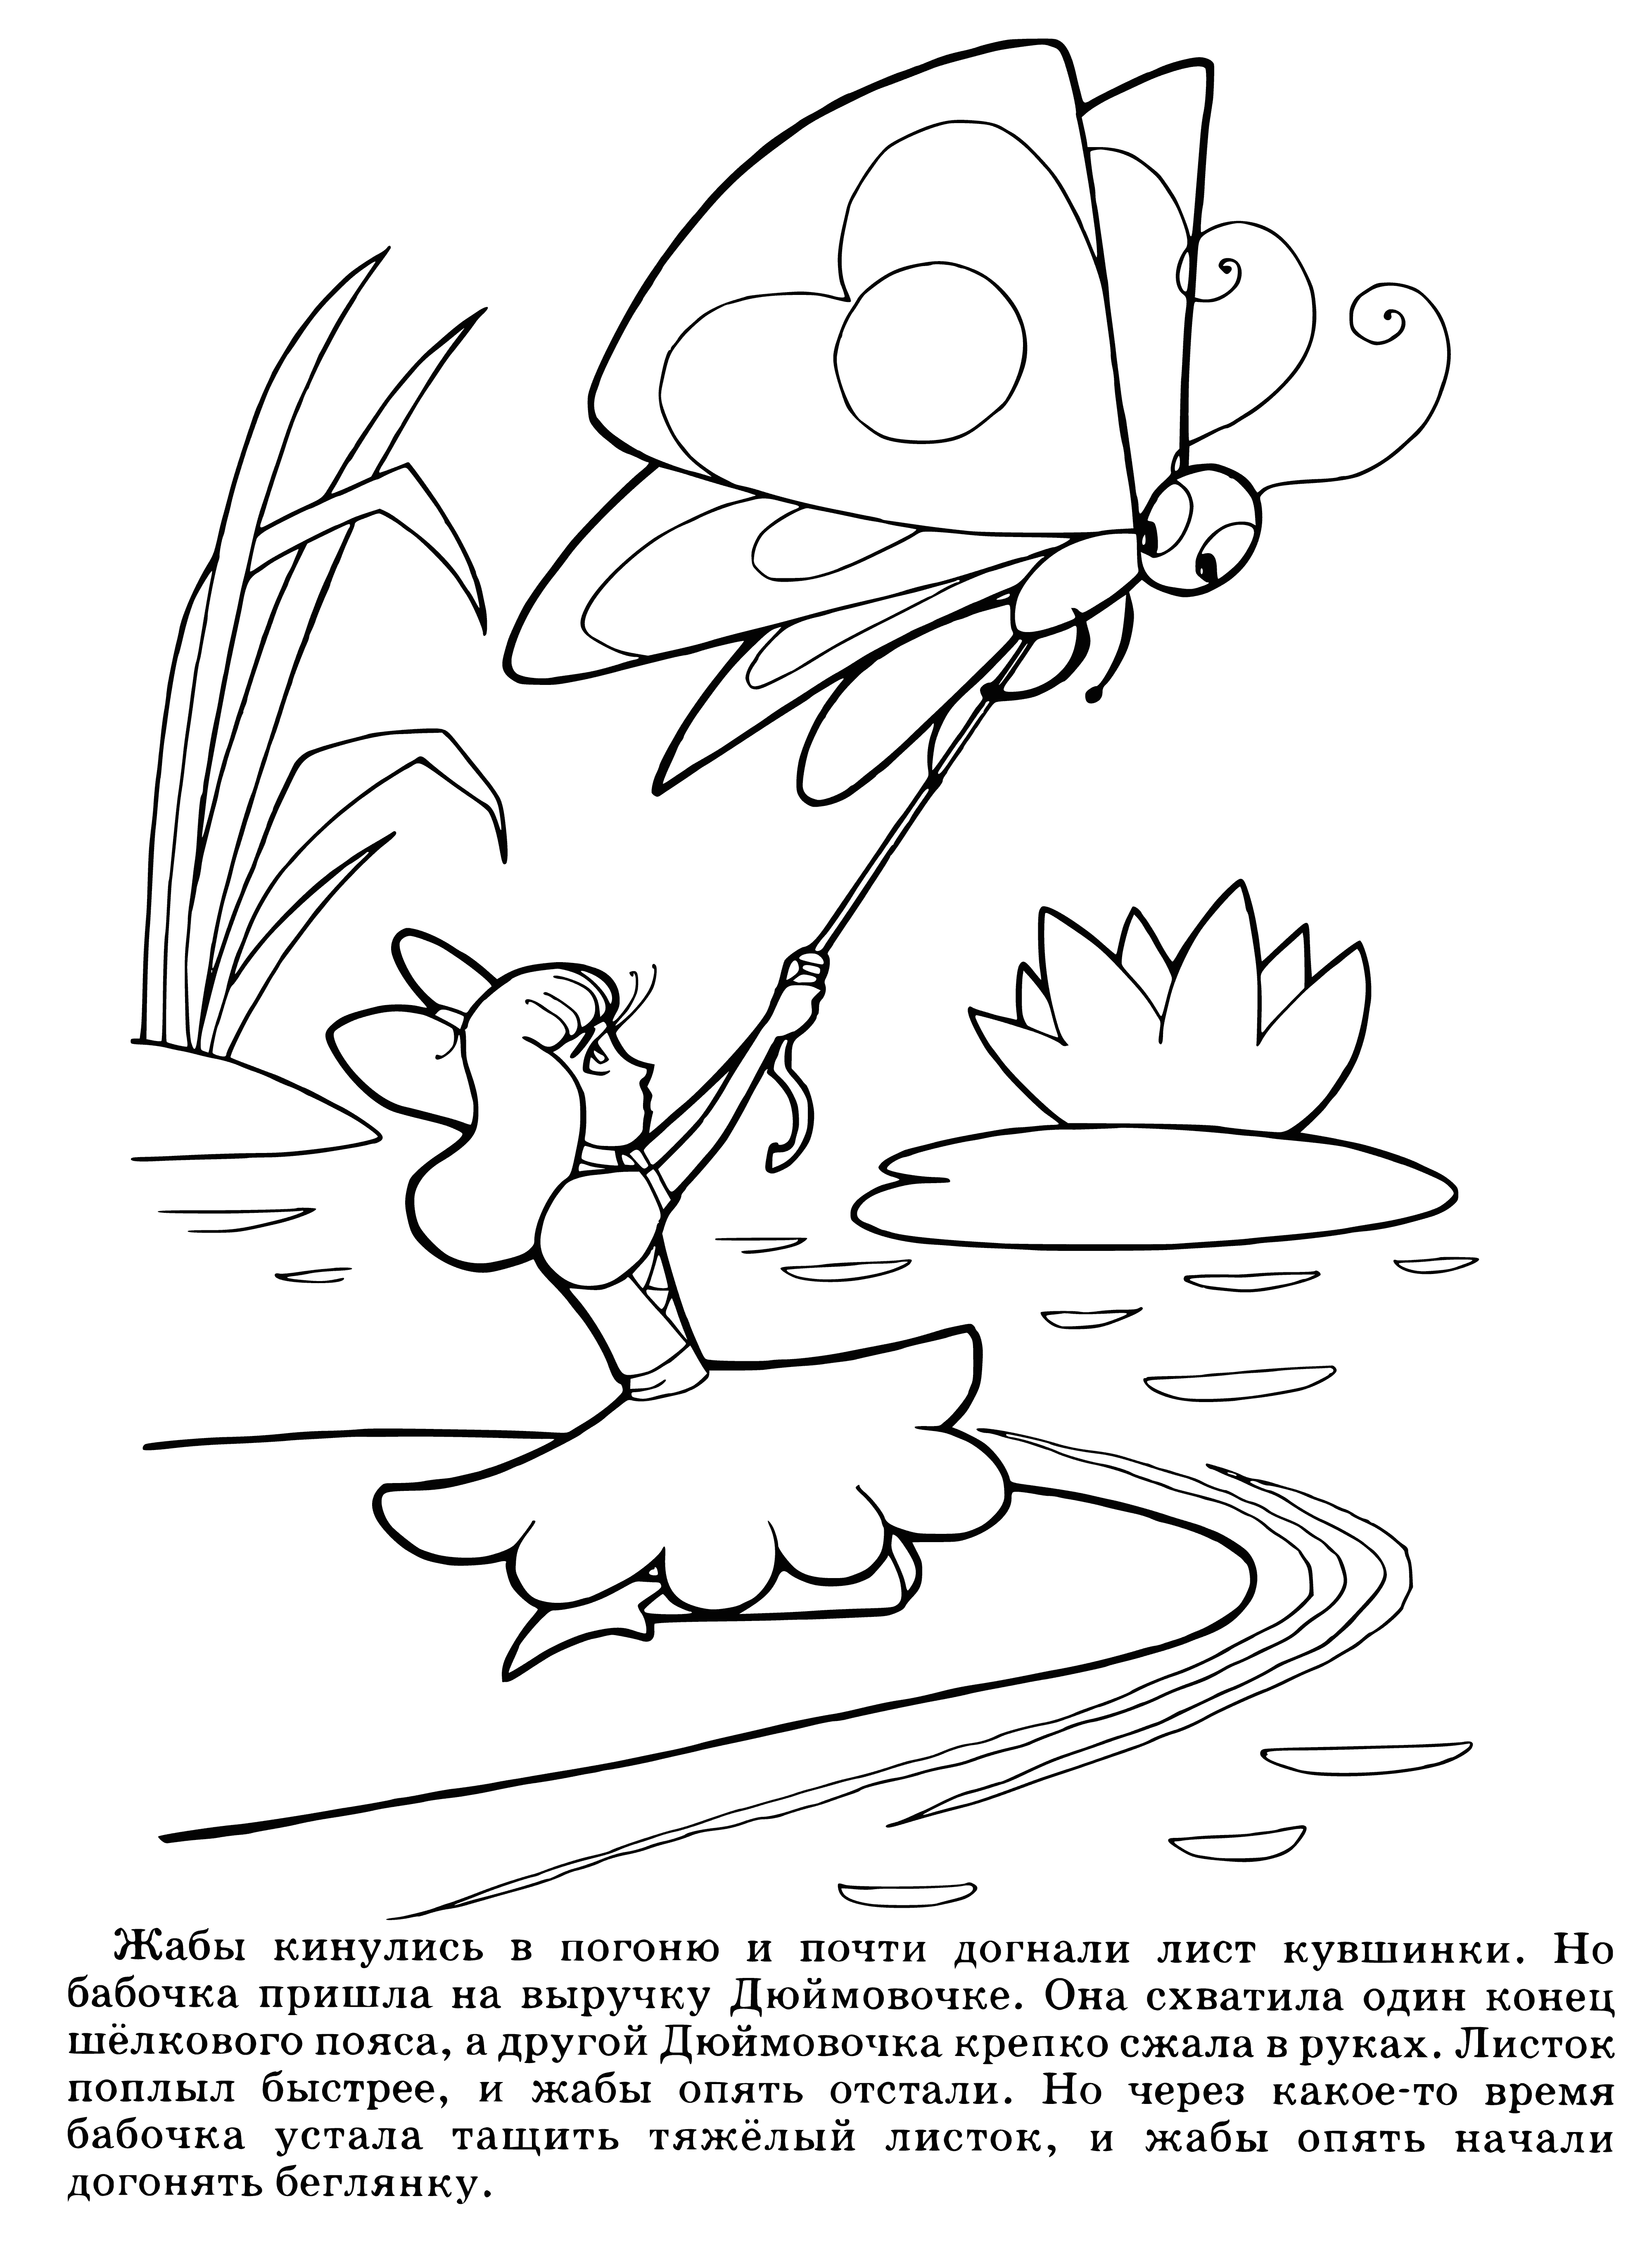 coloring page: Moth sits on sleeping man's shoulder, pulling on his hair with open mouth.